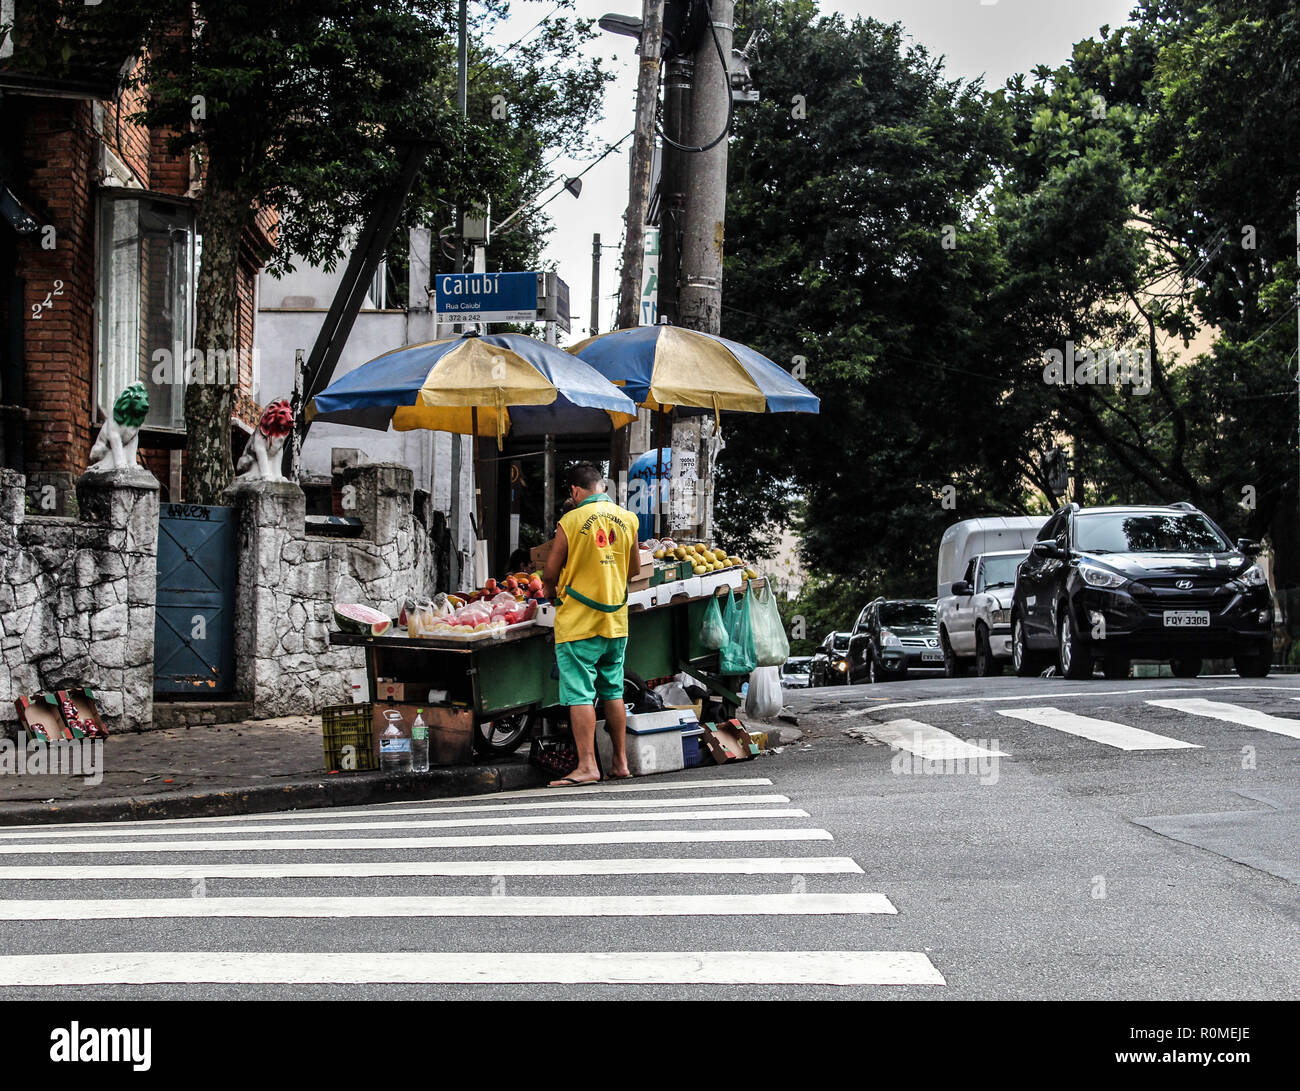 SÃO PAULO, SP - 06.11.2018: TRABALHO INFORMAL BATE RECORDE NO BRASIL - There are growing numbers of street vendors and self-employed workers in Brazil. According to data from the National Survey for Household Sample Continuous, released by the IBGE last week, Brazil broke the record for the number of people in the informal sector. It is estimated that 35 million Brazilian citizens are currently in informal activities, of which 11.5 million are without a formal contract and 23.5 million are self-employed. In the photo, walking with fruit stand in the neighborhood of Perdizes, west of São Paulo, Stock Photo